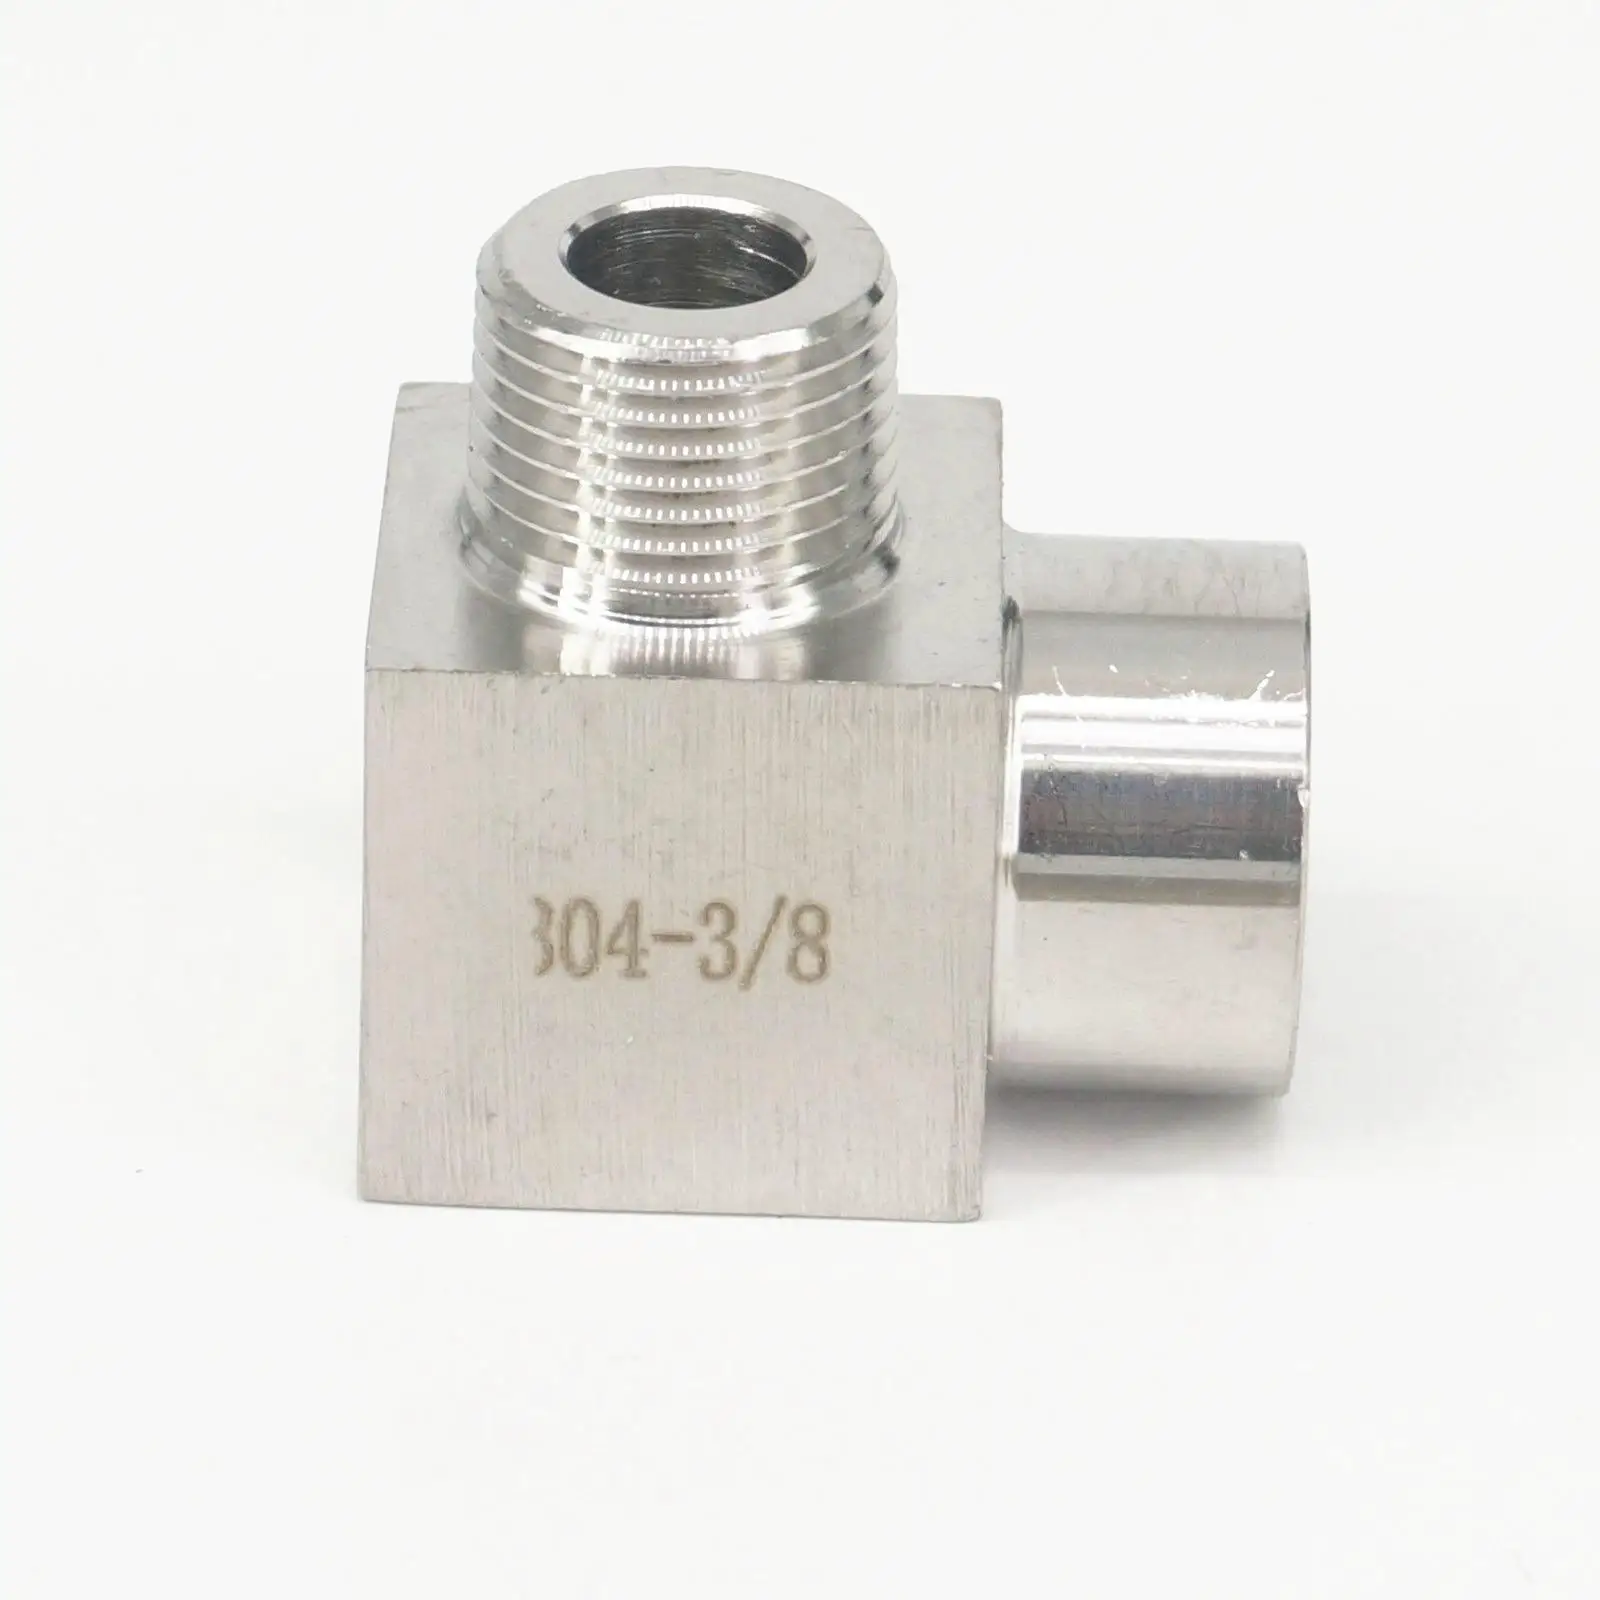 1/8" Bsp Female to 1/8" Bsp Female Elbows Fittings 1 Off                    B23a 